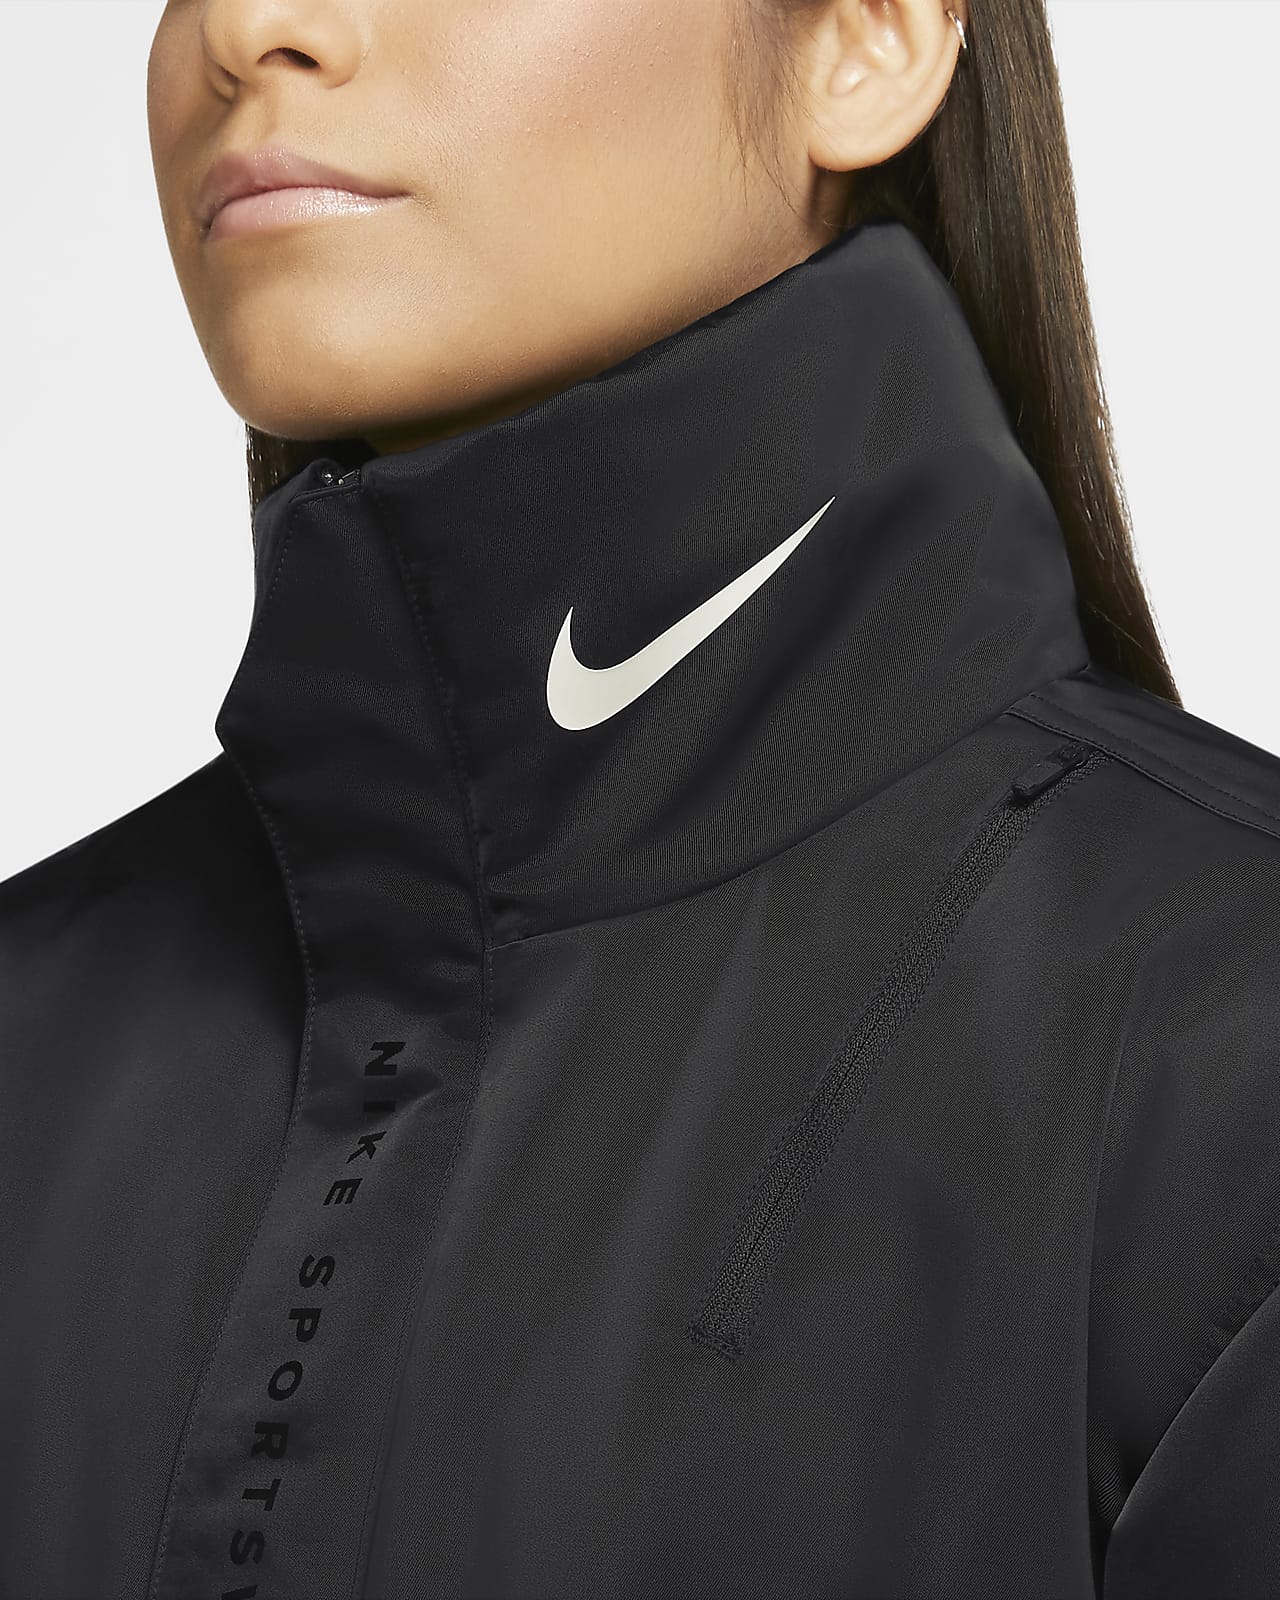 synthetic fill nike